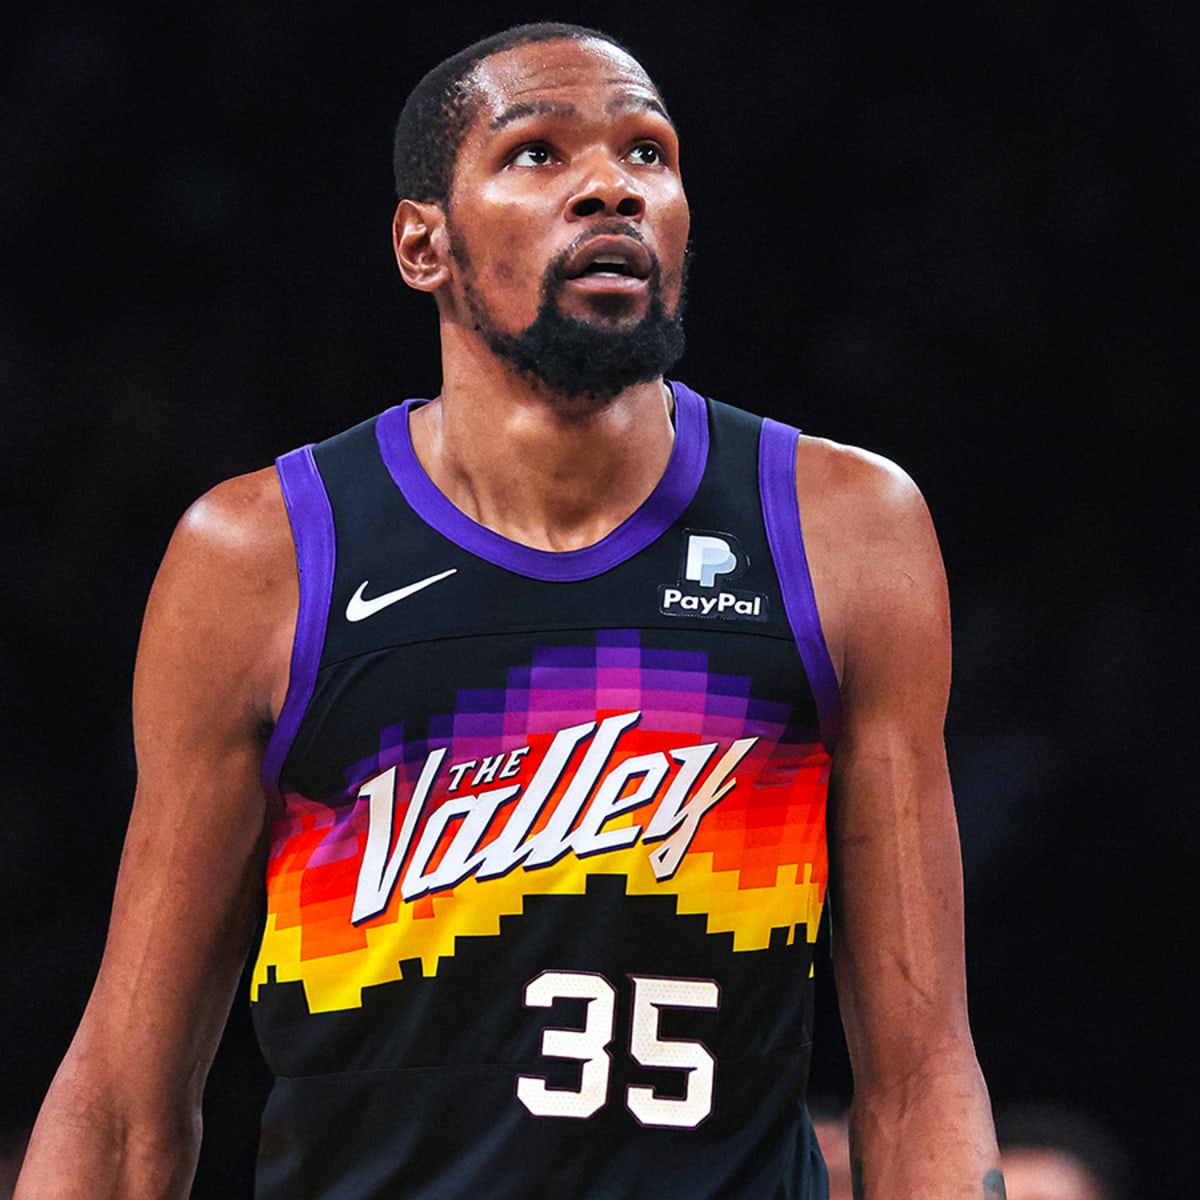 Trade of the year! Kevin Durant to Phoenix Suns, just in time for SB LVII